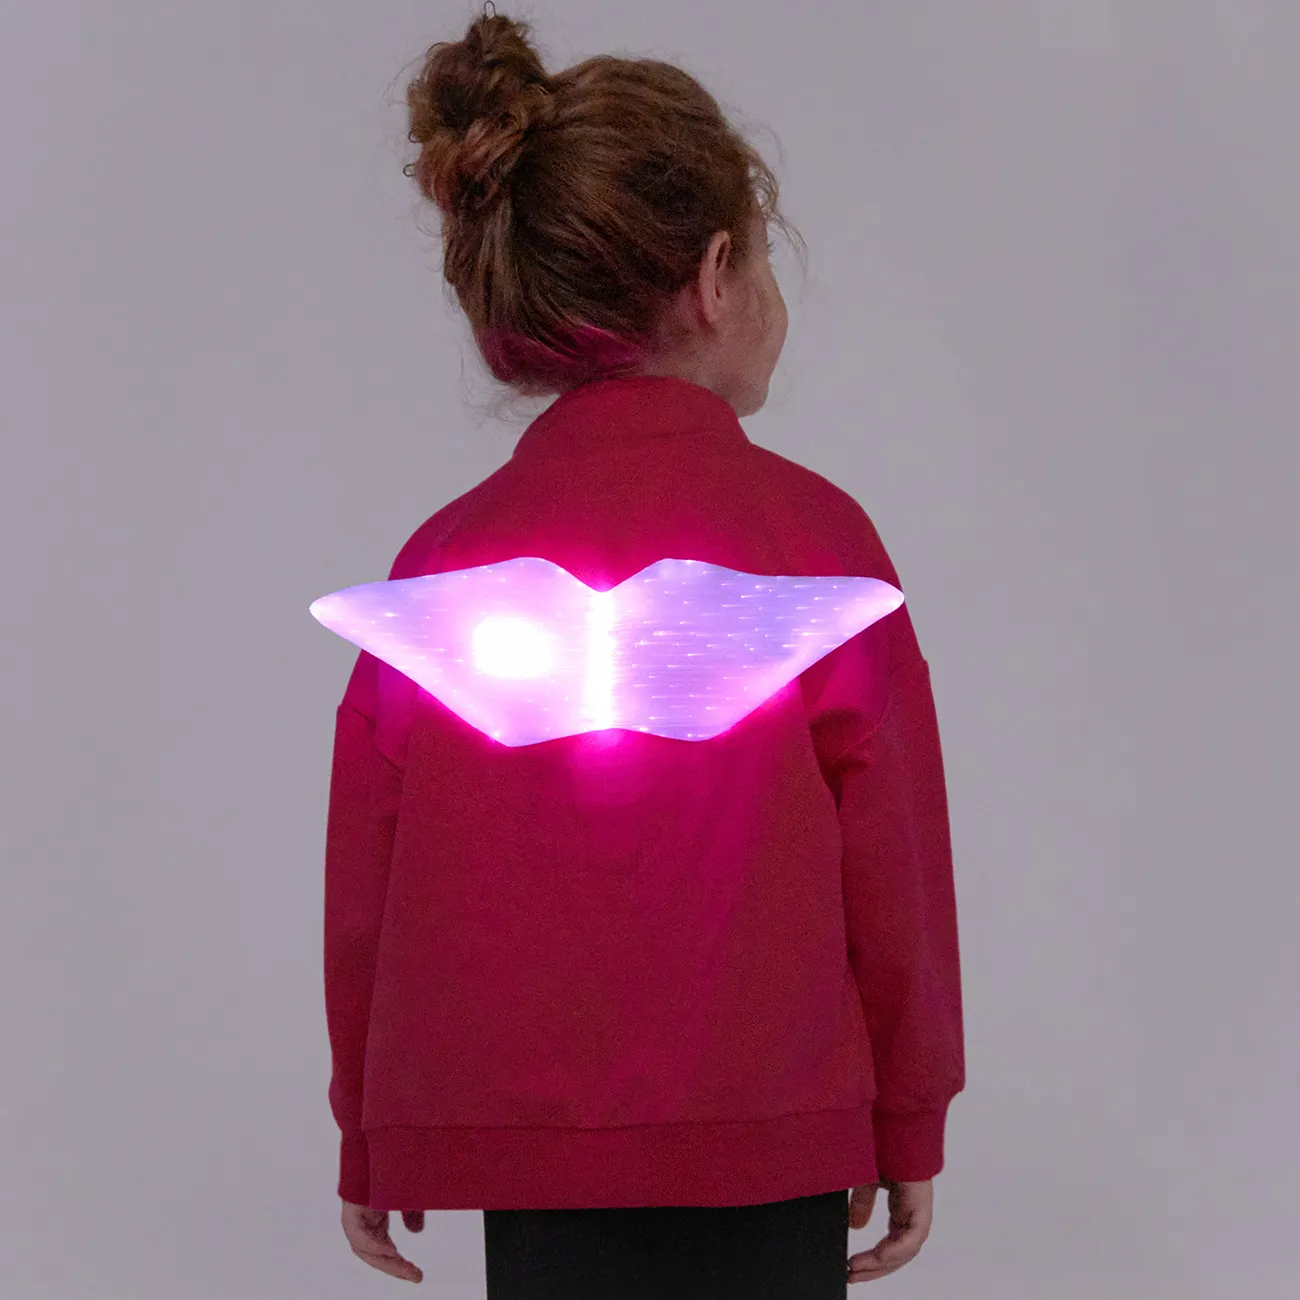 Go-Glow Illuminating Jacket with Light Up Wings Including Controller (Built-In Battery)  big image 1